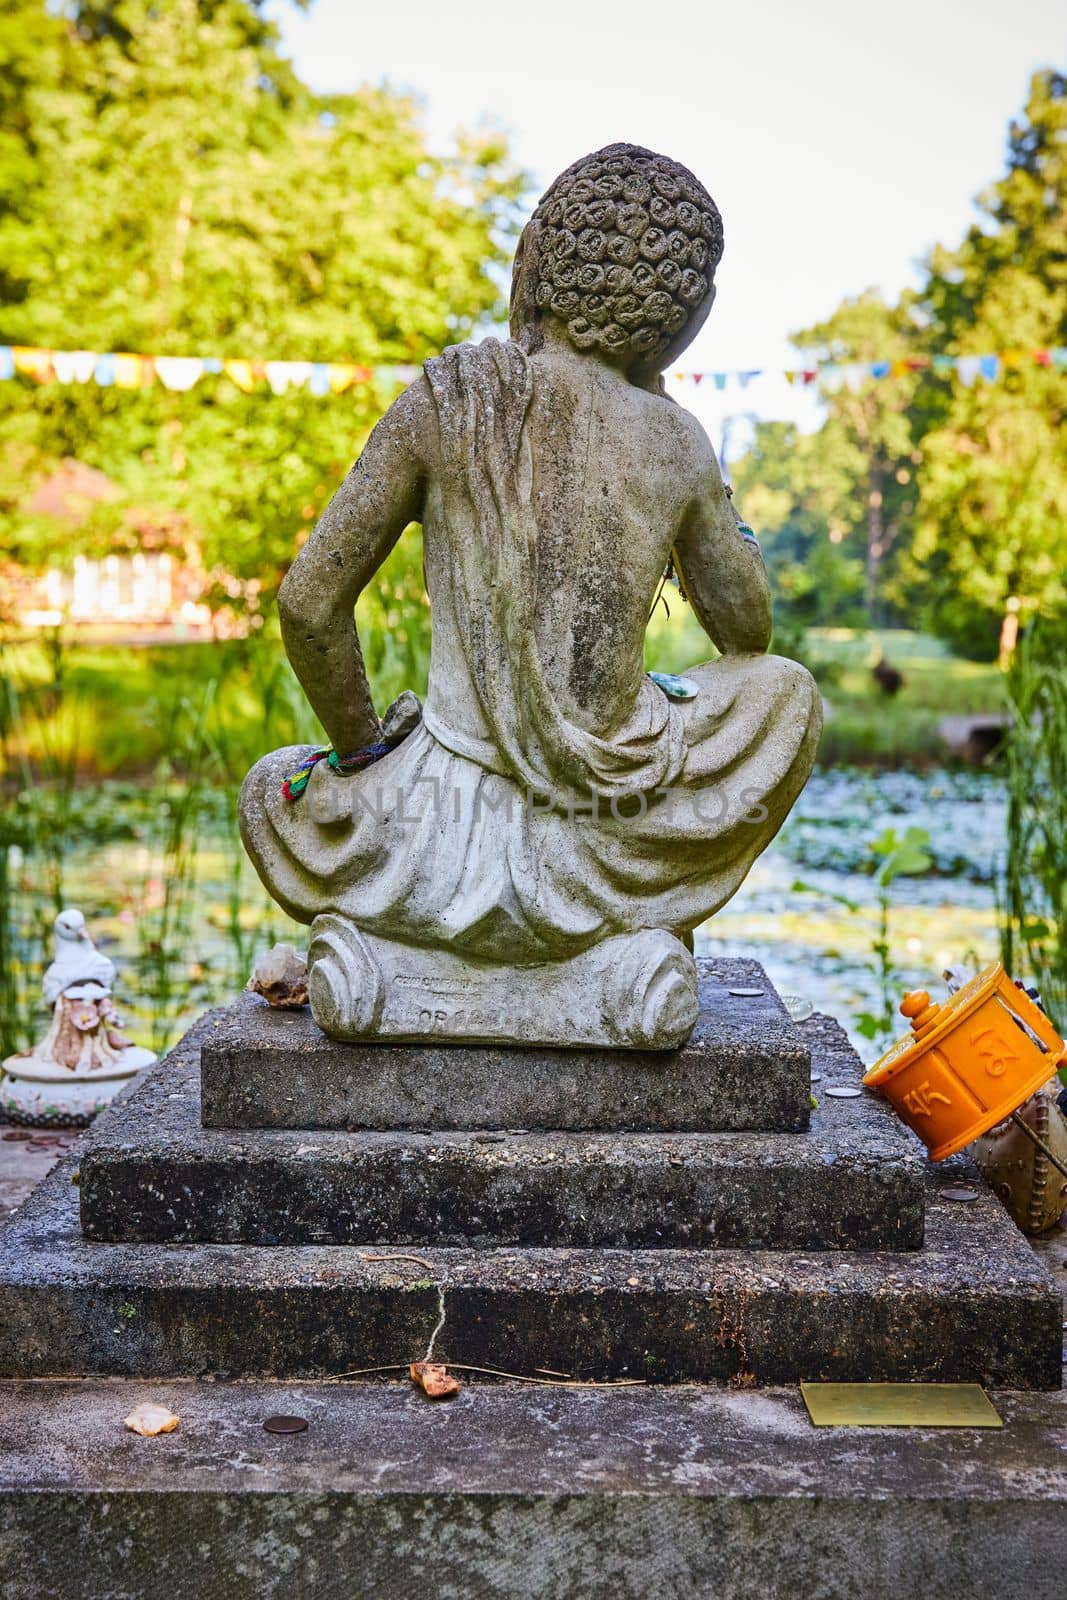 Image of Tibetan Mongolian Buddhist stone statue from behind overlooking lily pond